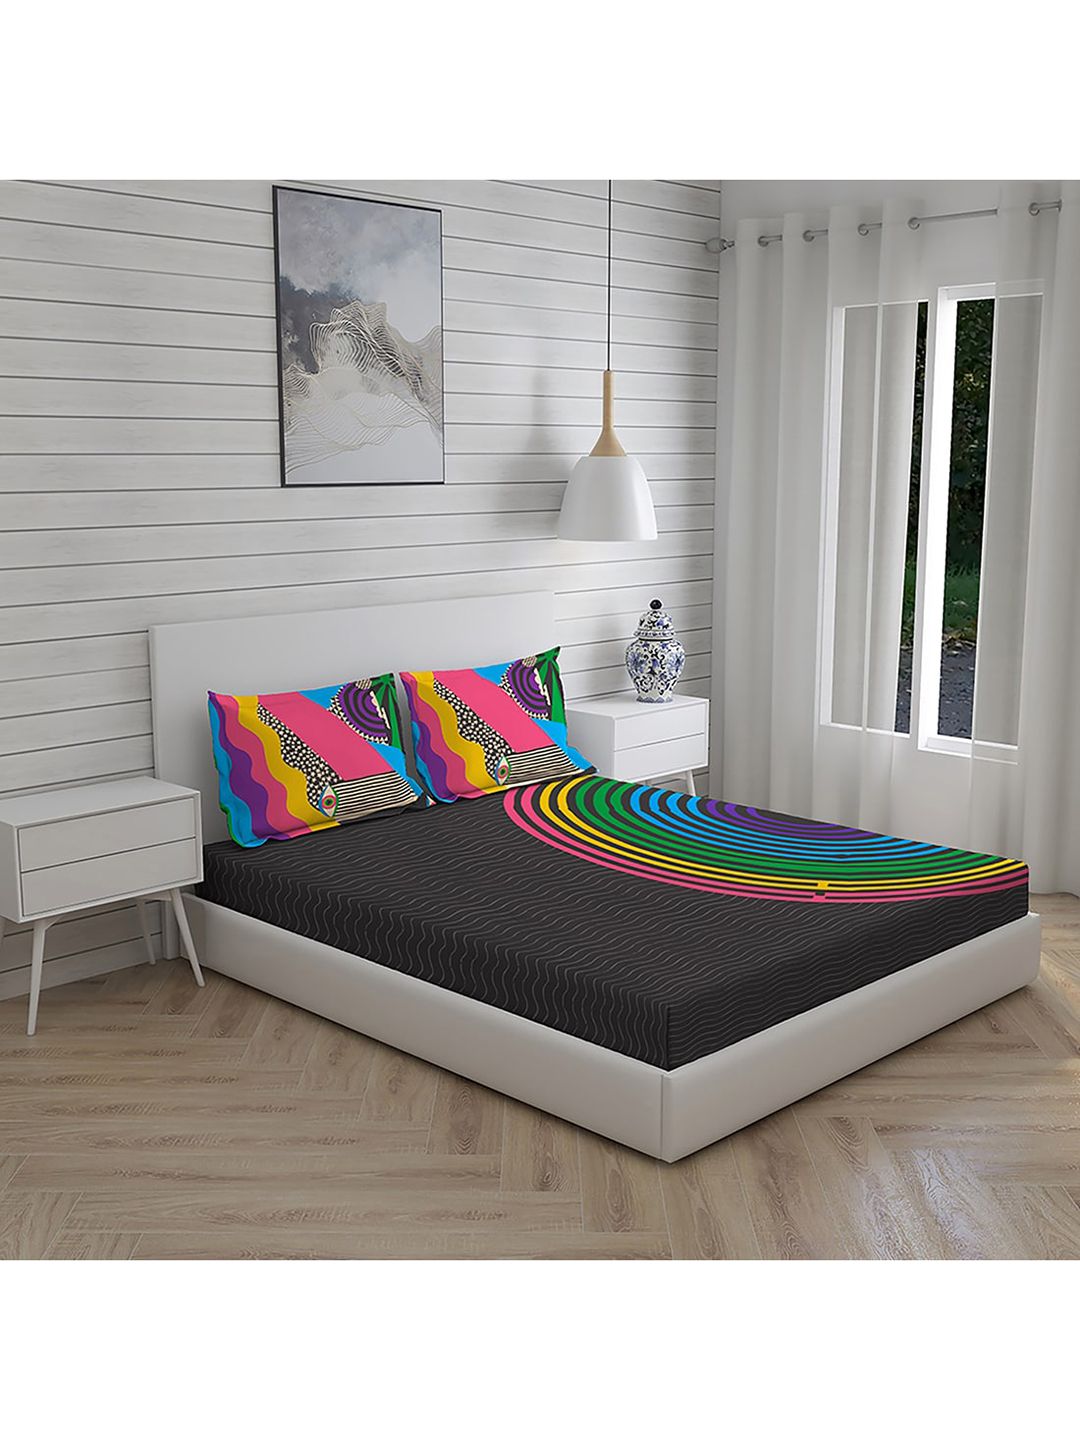 Boutique Living India Black & Pink King Bedsheet 300 GSM with 2 Pillow Covers Price in India